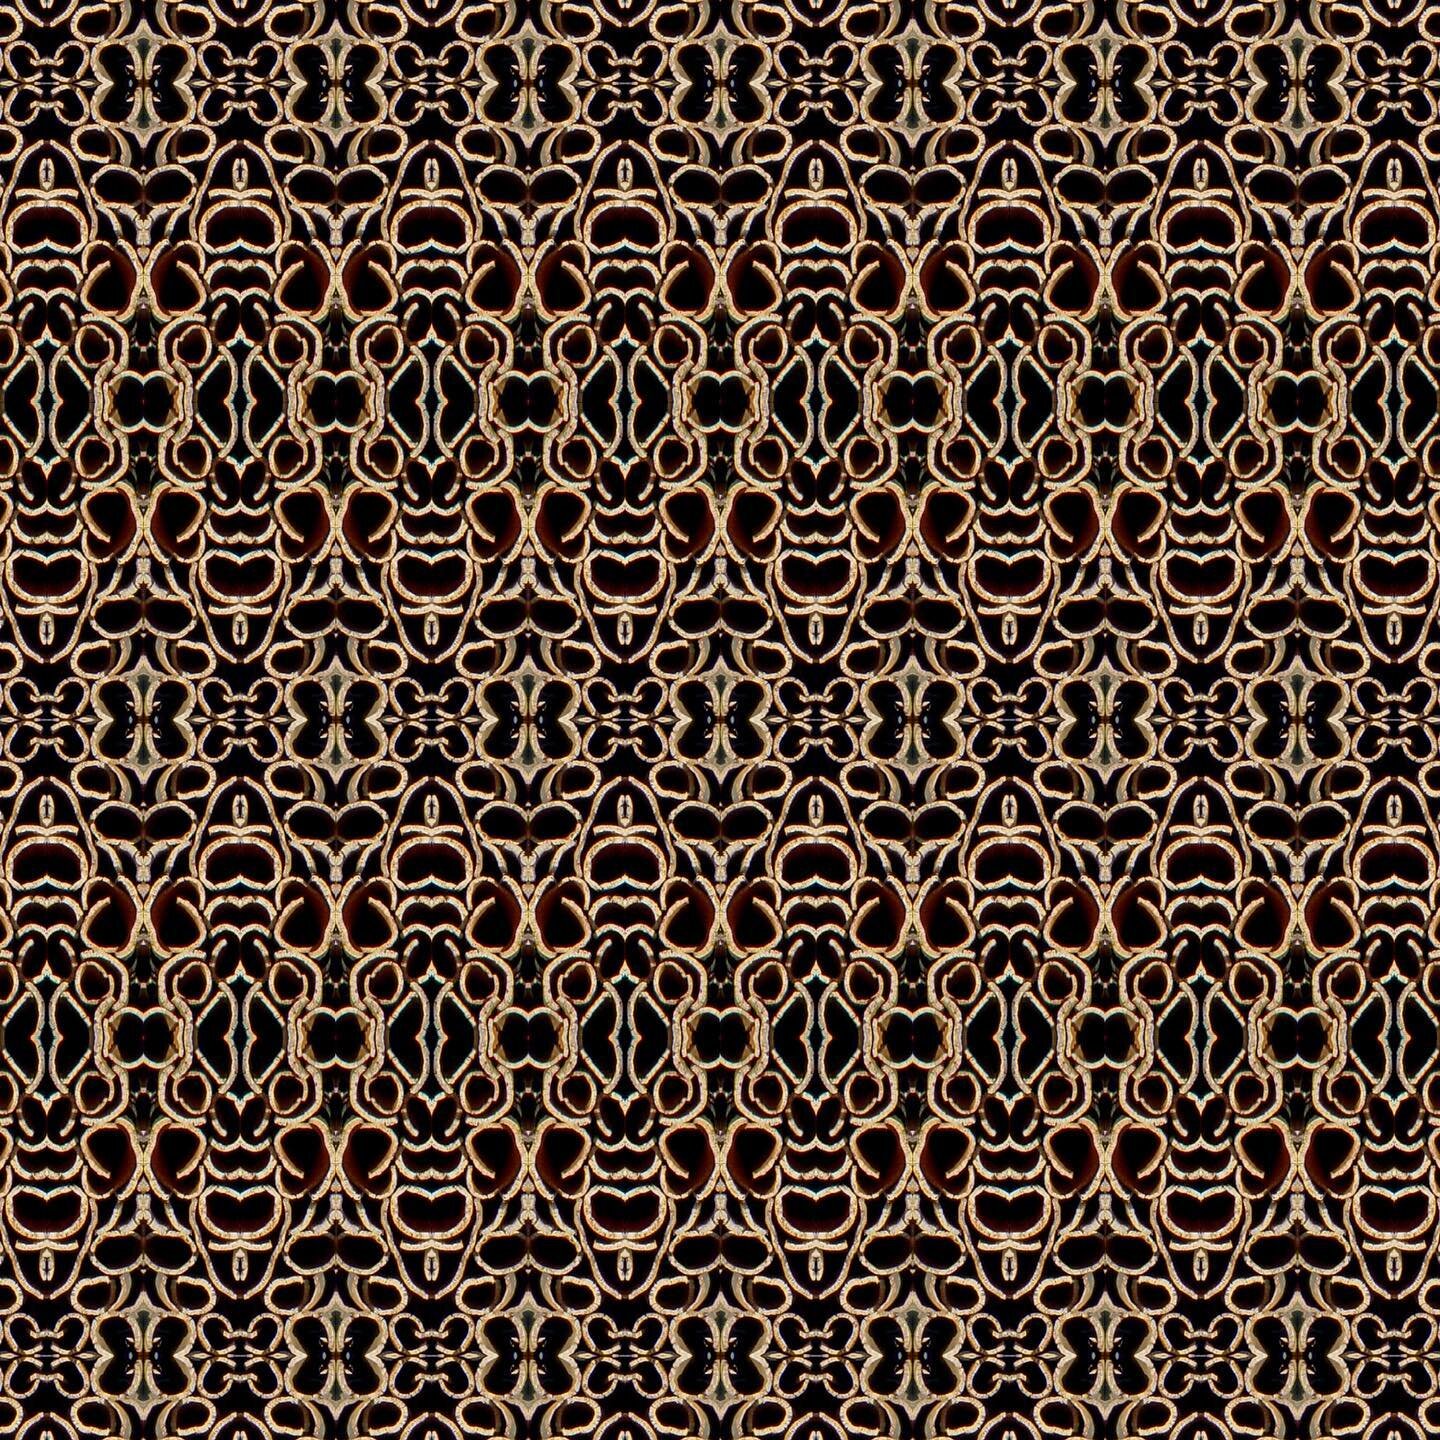 C O R K E R

What a corker indeed! This #pattern my well make your eyes dazzle!! Curls of natural cork form this beautiful if slightly mesmeric design!

#katecledwyndesign #patterndesign #patternsinnature #patterndesigner #licensedtocreate #wallpaper